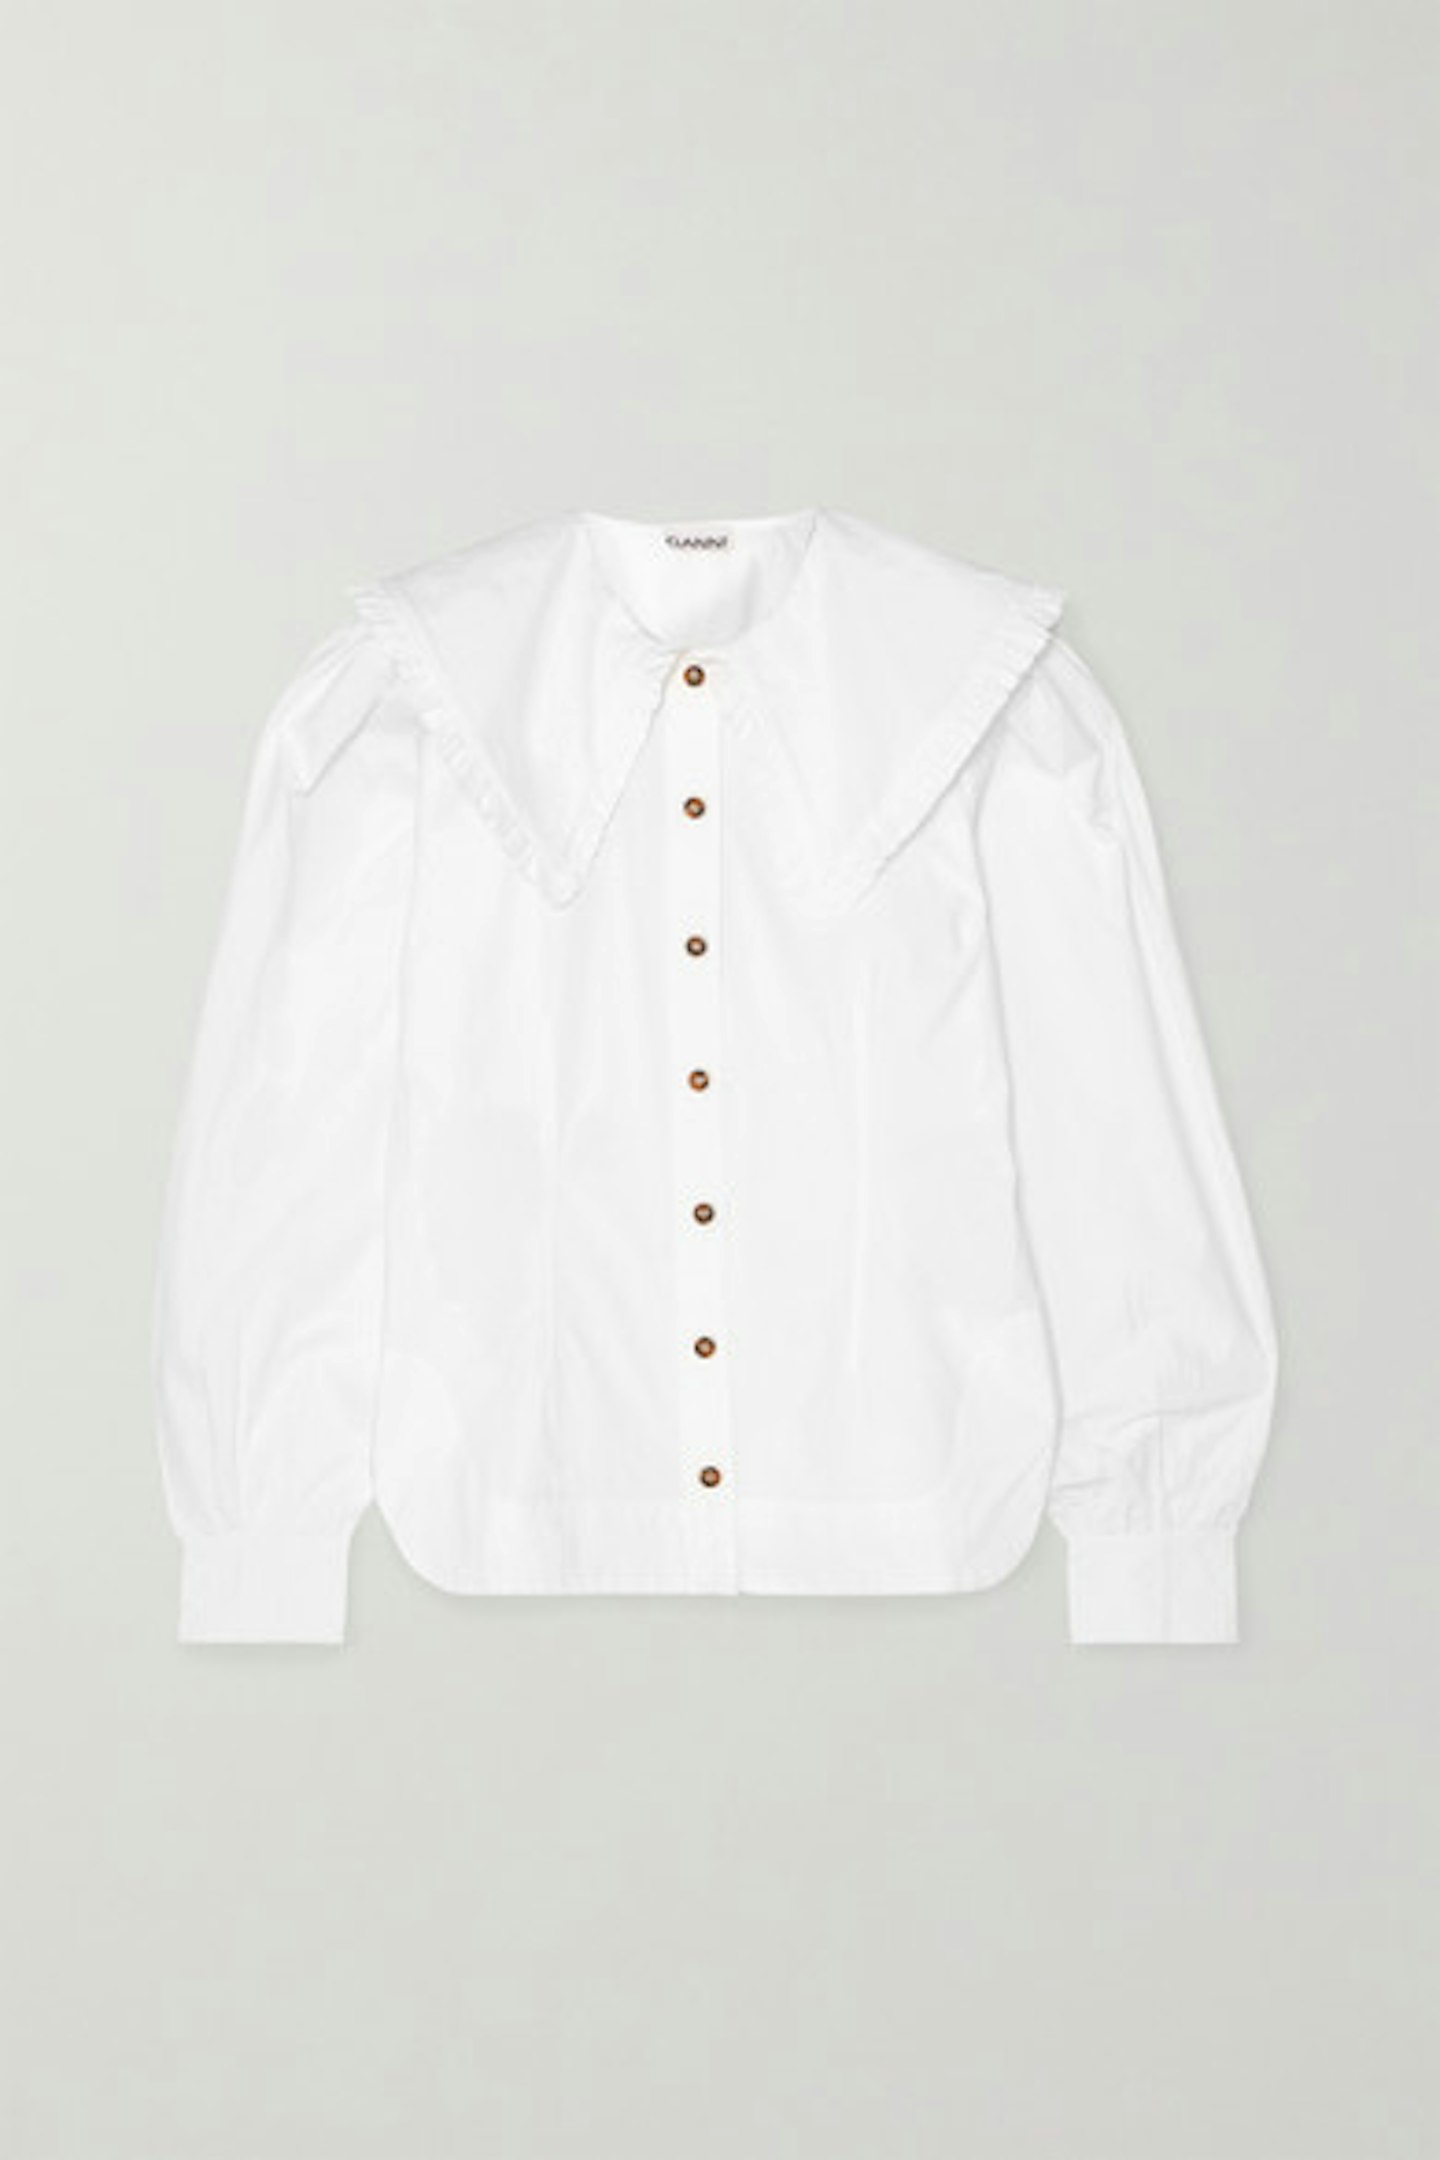 Ganni, White Blouse With Exaggerated Collar, £120